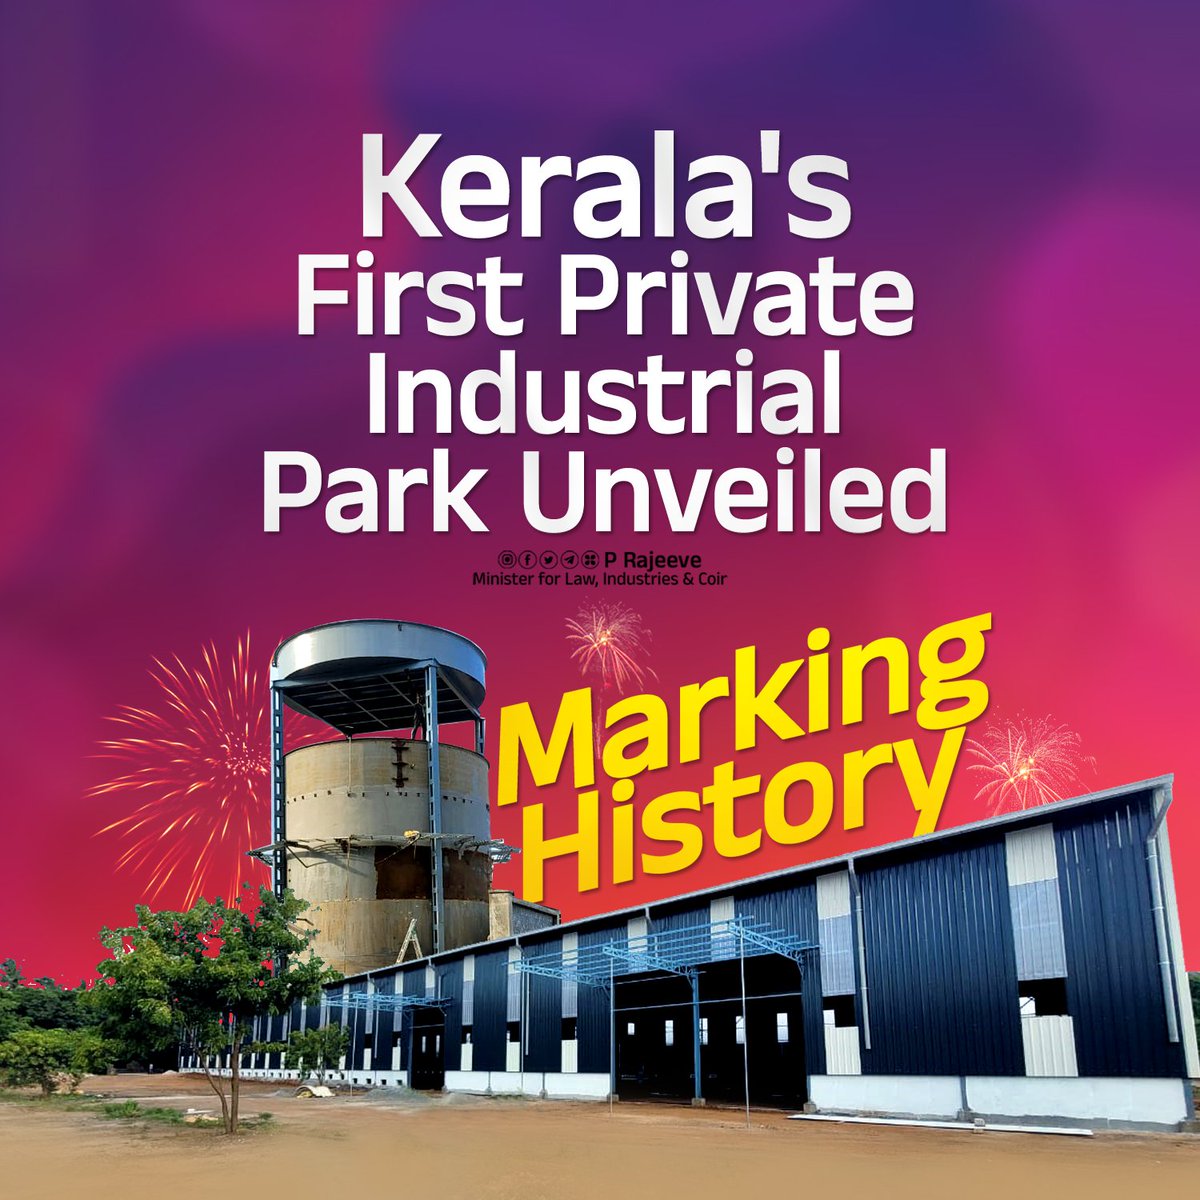 Kerala's inaugural Private Industrial Park propels significant economic progress, aiding in shaping Kerala's industrial growth with a target of 100 crores in 3 years. The ongoing establishment of 15 more parks across districts signifies an imminent industrial evolution.